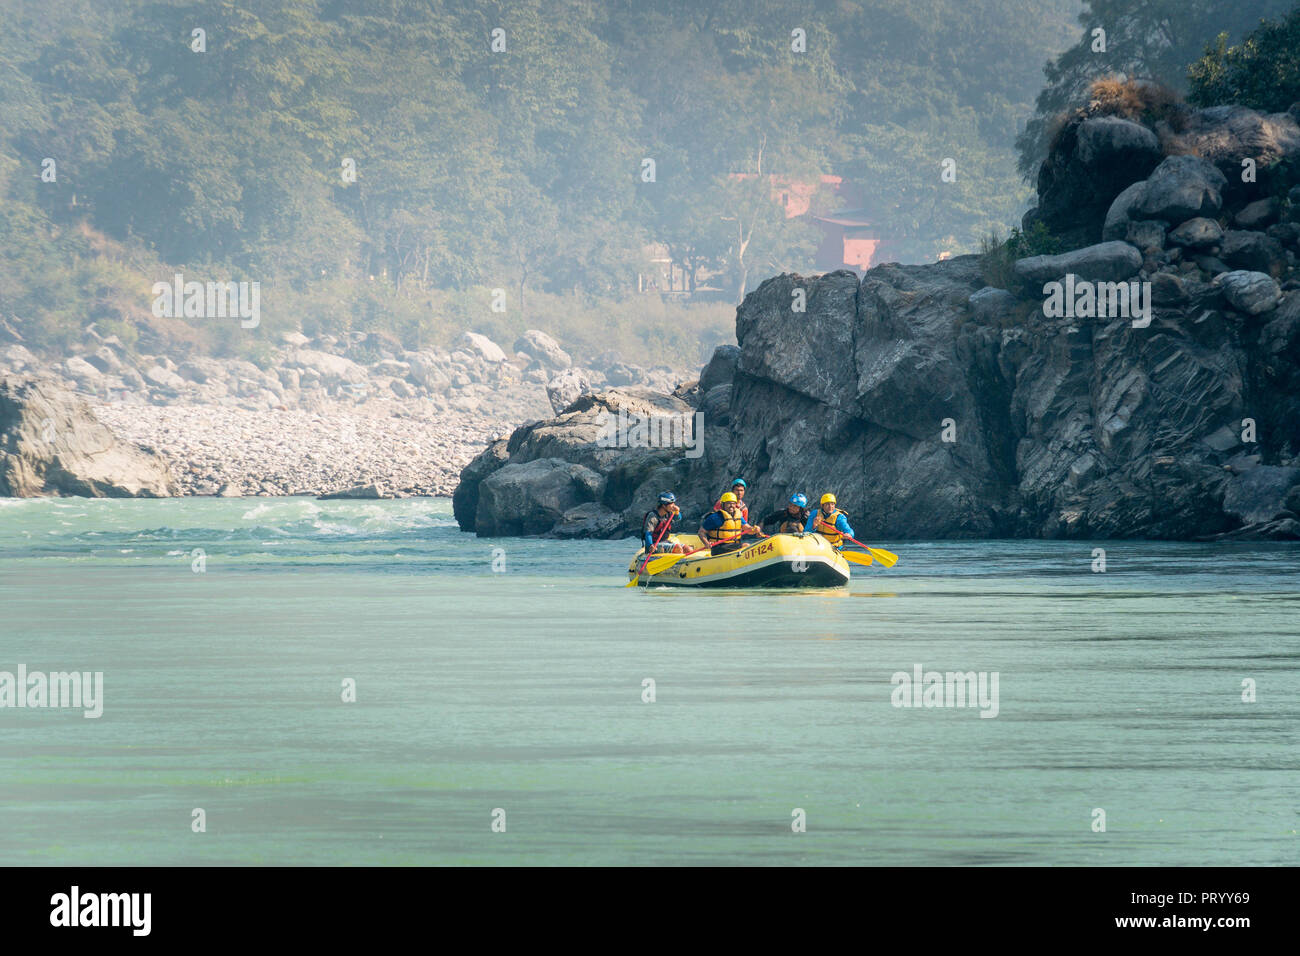 Young persons rafting on the Ganges river in Rishikesh, extreme and fun sport at tourist attraction. Rishikesh India. January 10, 2018. Stock Photo